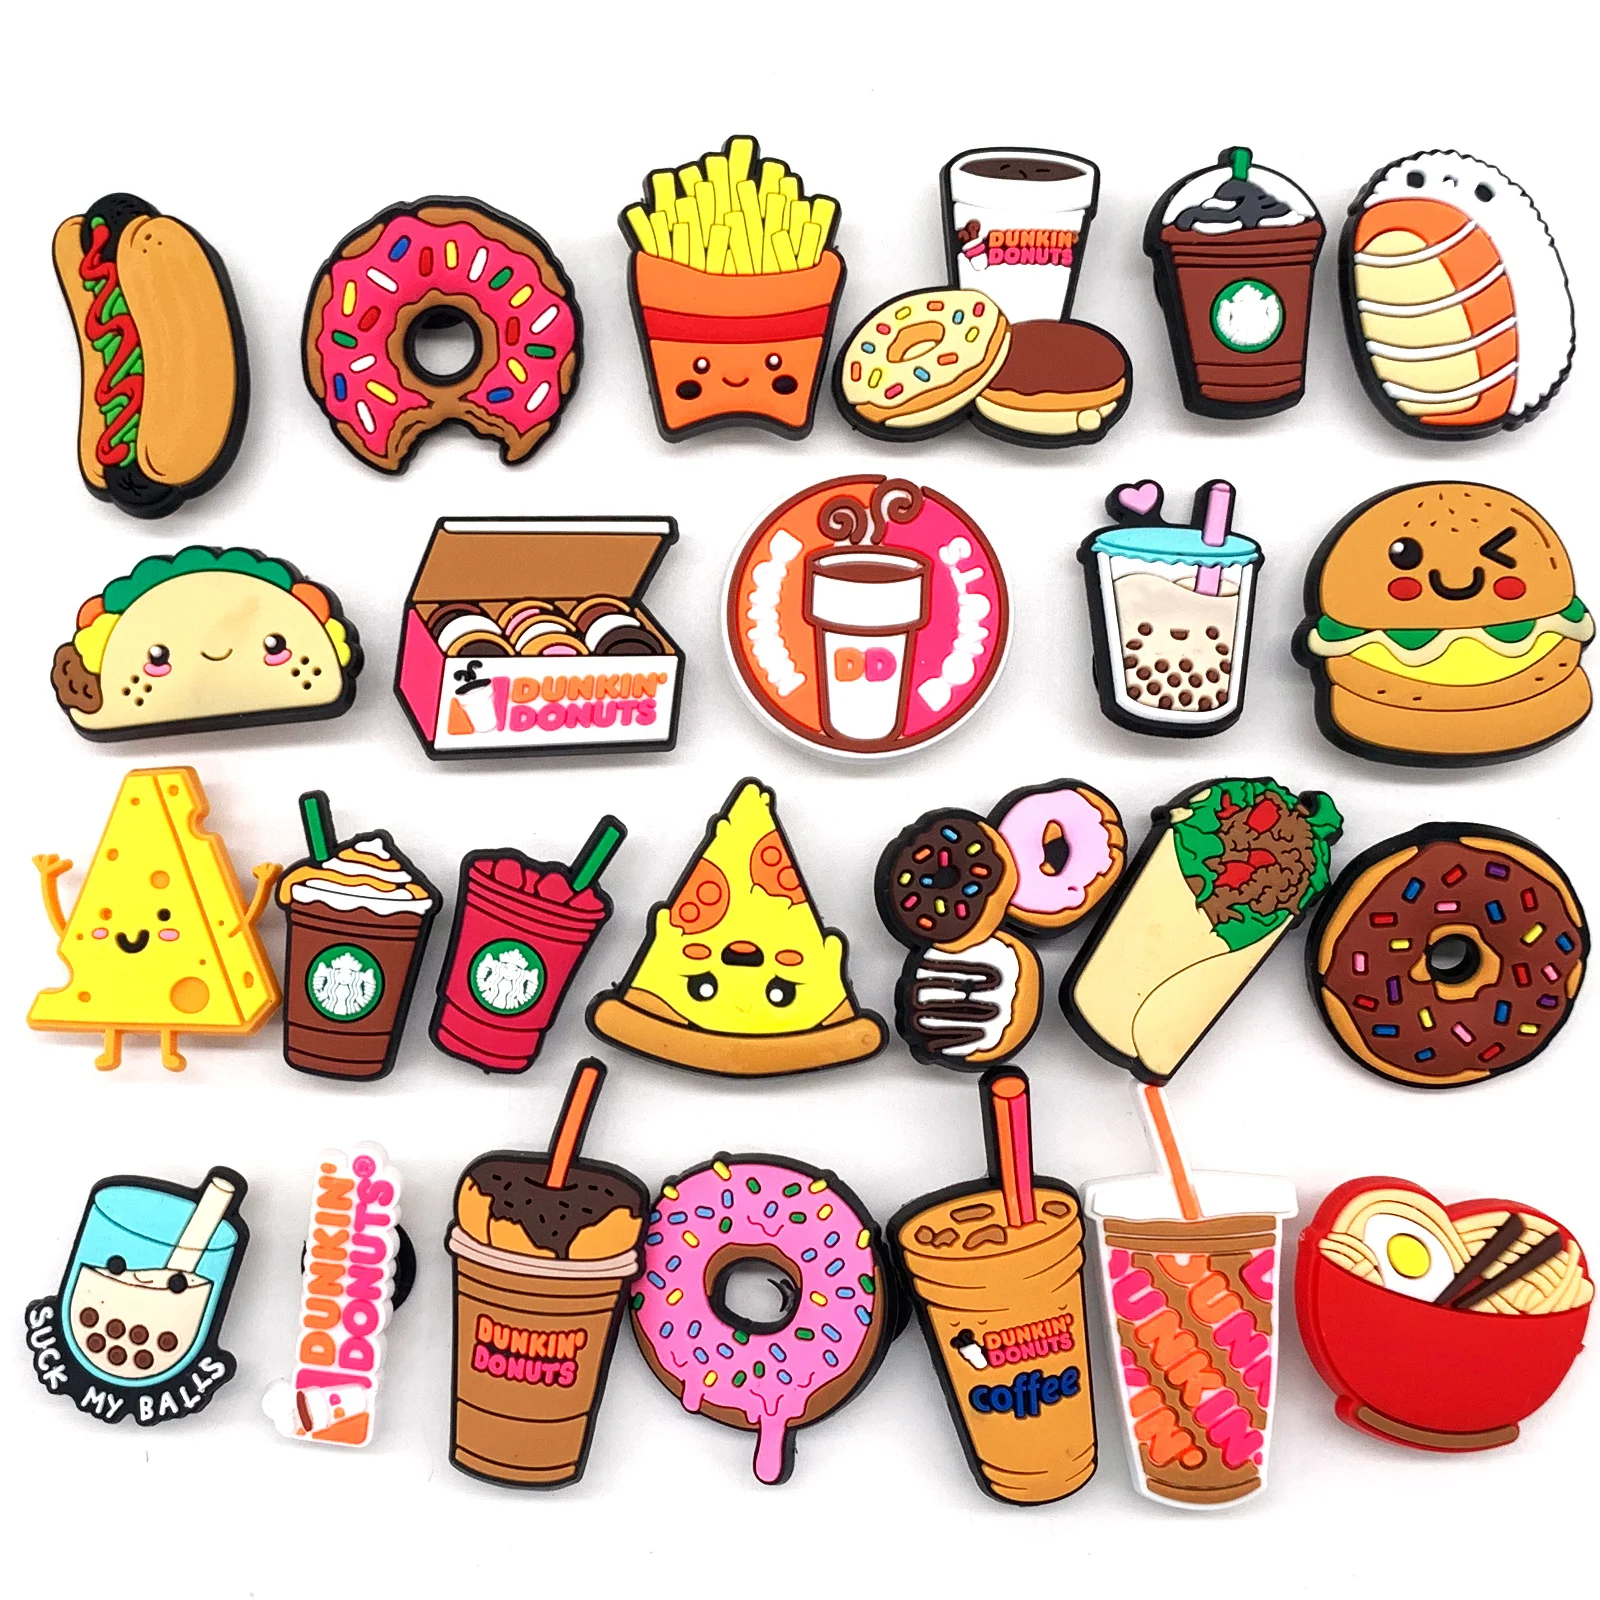 

1pc Cute Cartoon Foods and Drinks PVC Croc Charms JIBZ Fit Clog Sandals Garden Shoe Decoration Accessories Kids Party Gift